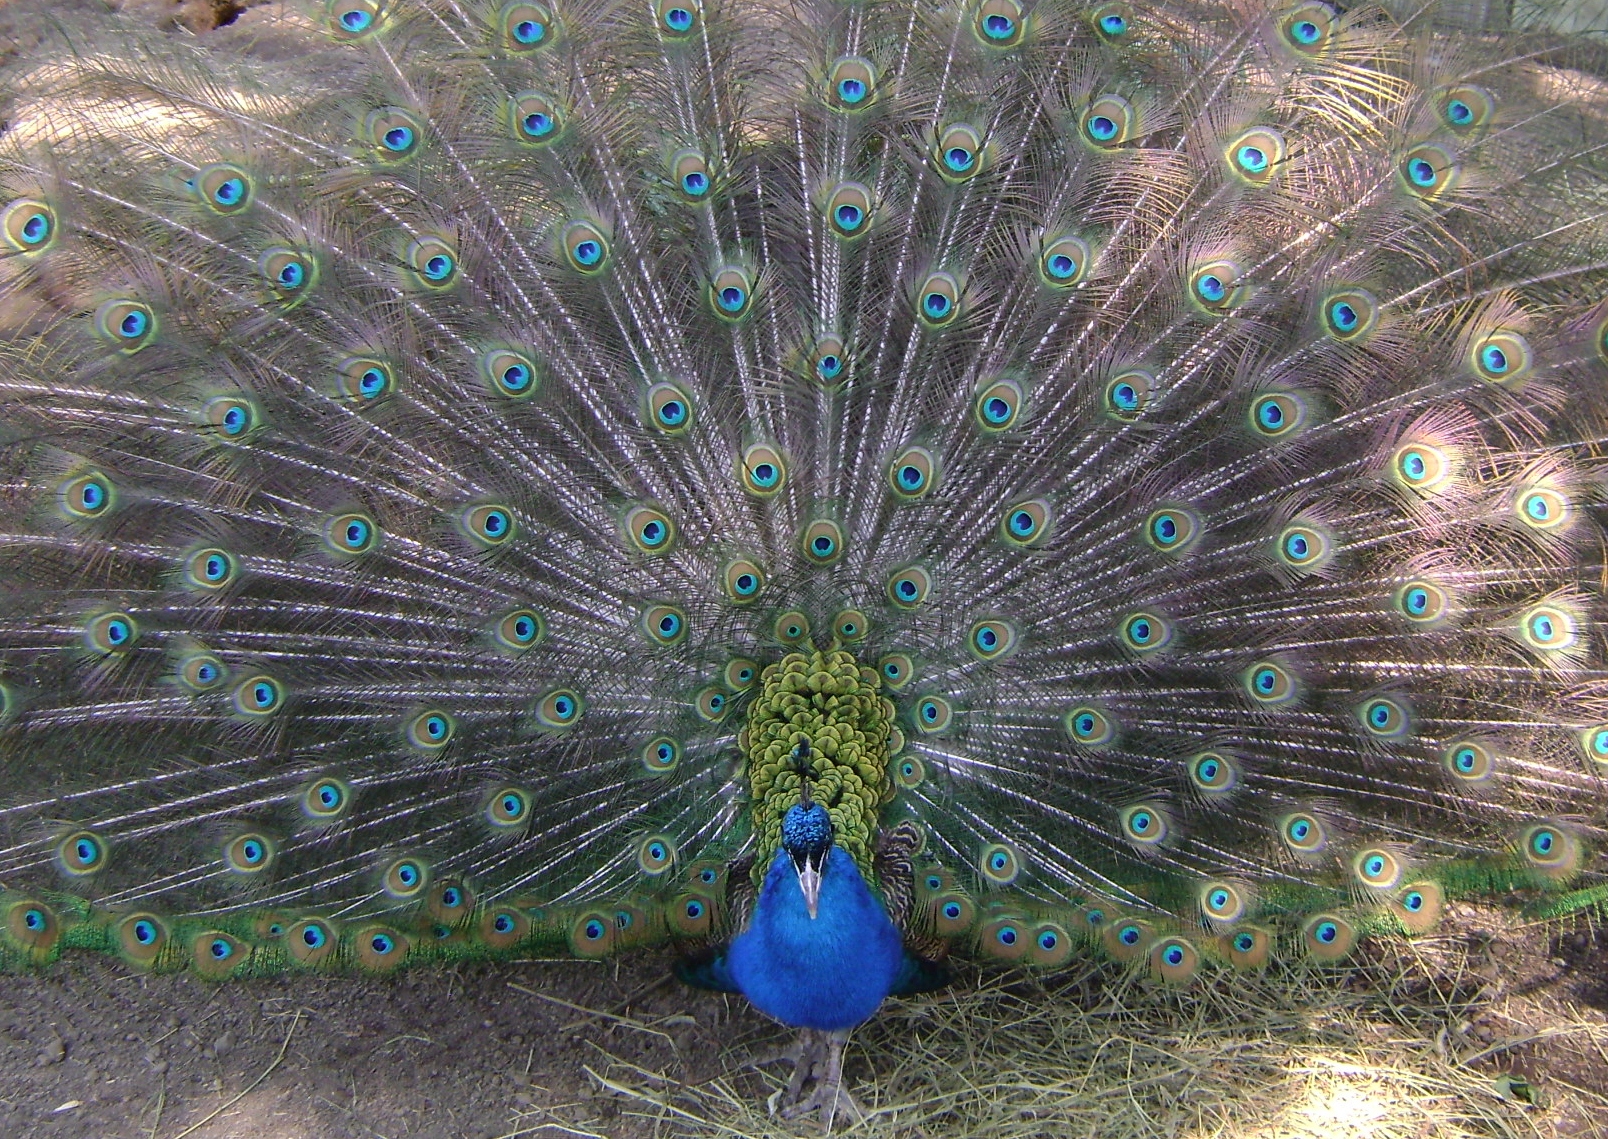 Peacock Attraction (user submitted)